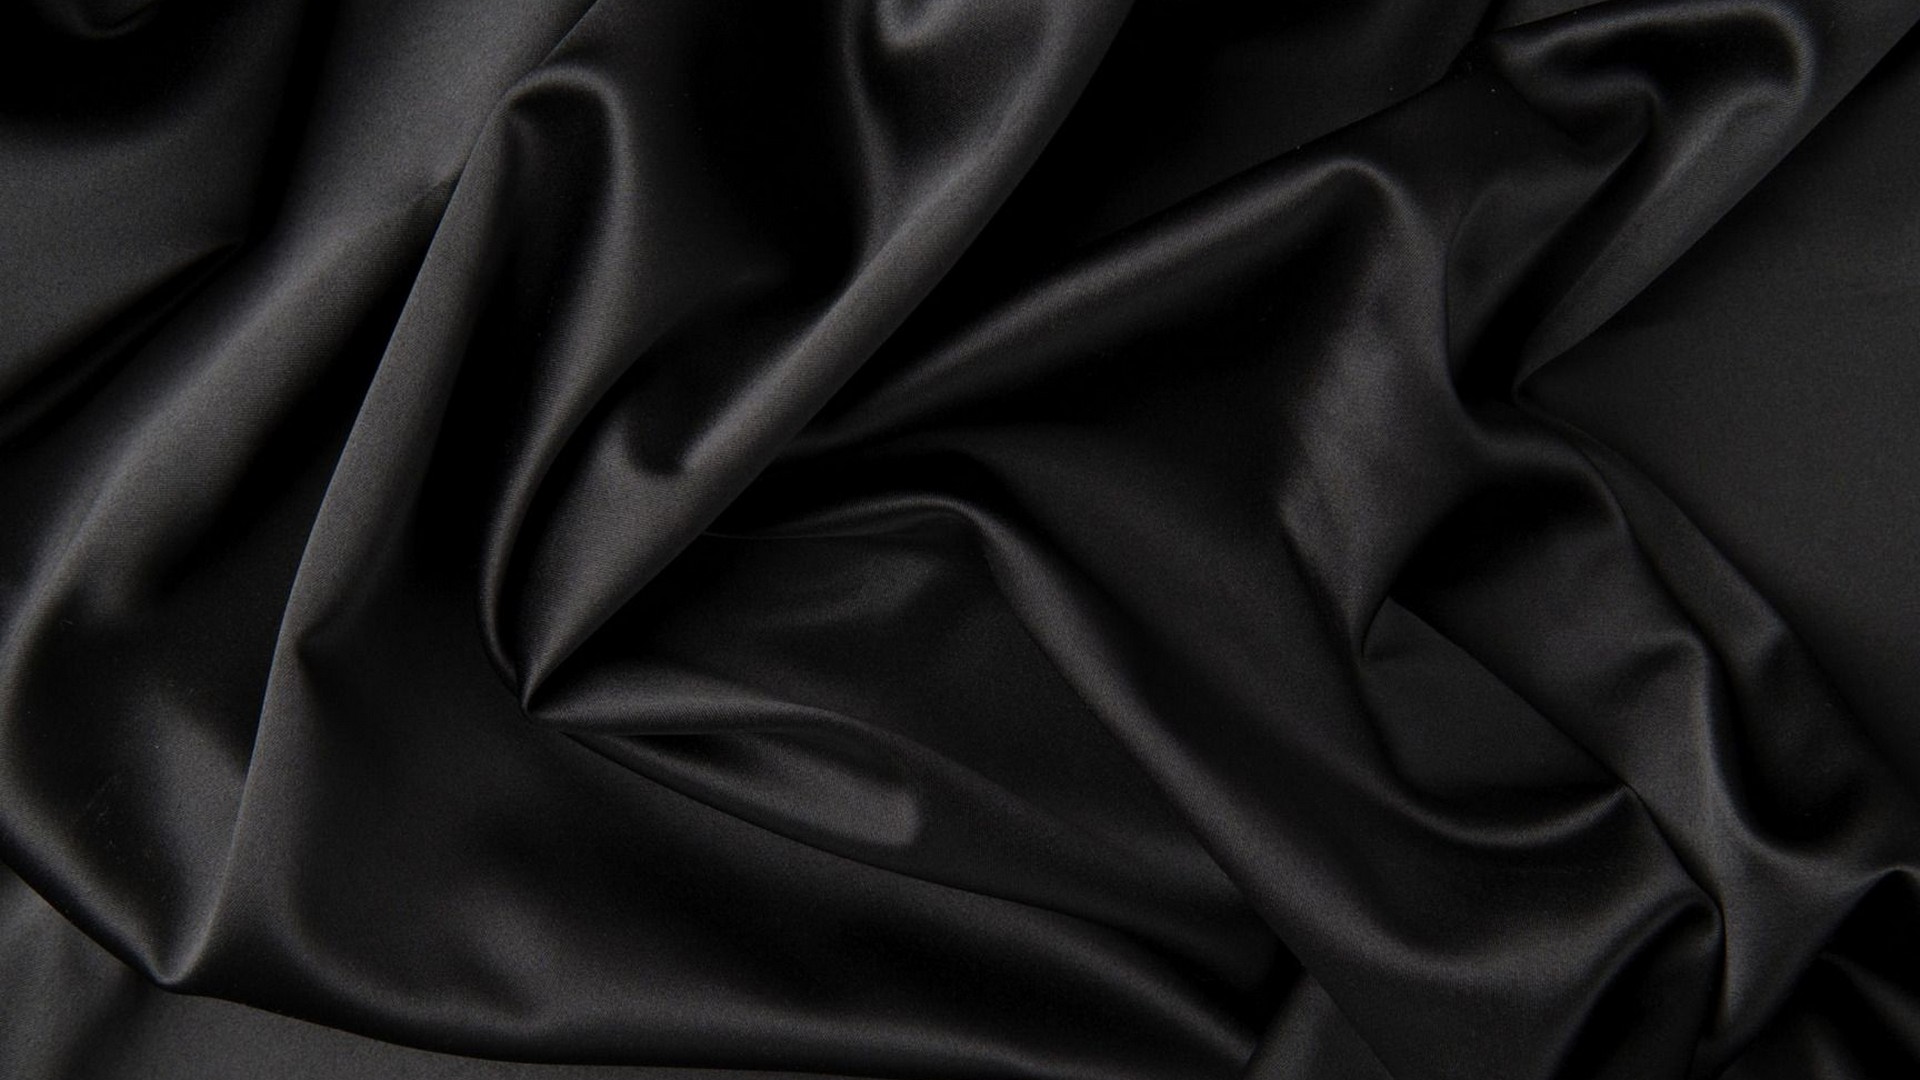 Black Silk iPhone Wallpaper Home Screen with high-resolution 1920x1080 pixel. You can set as wallpaper for Apple iPhone X, XS Max, XR, 8, 7, 6, SE, iPad. Enjoy and share your favorite HD wallpapers and background images